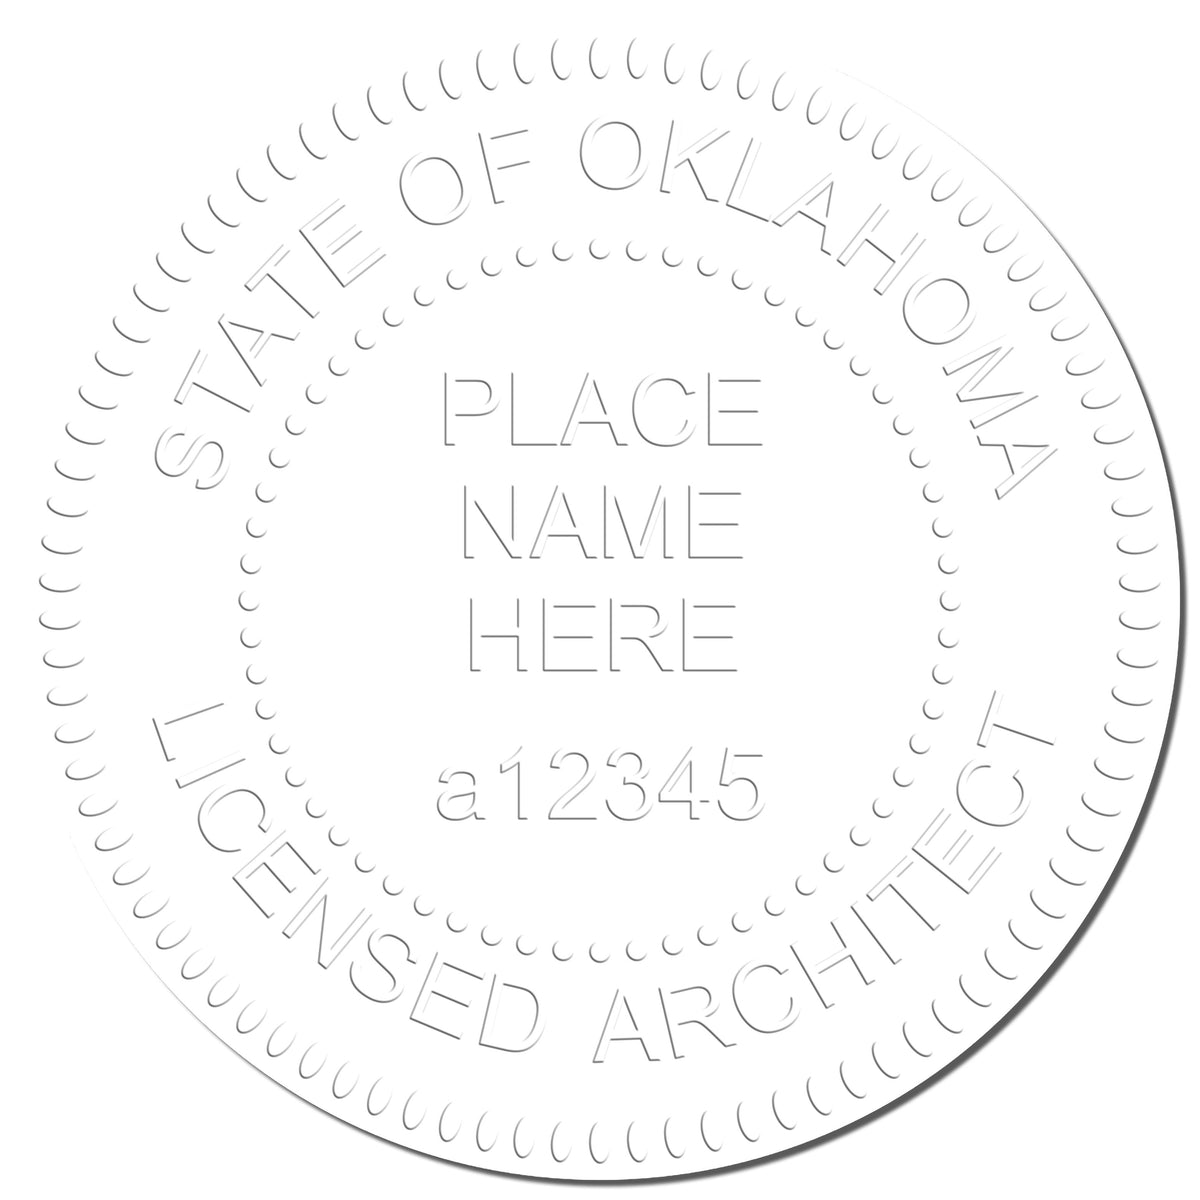 A photograph of the Handheld Oklahoma Architect Seal Embosser stamp impression reveals a vivid, professional image of the on paper.